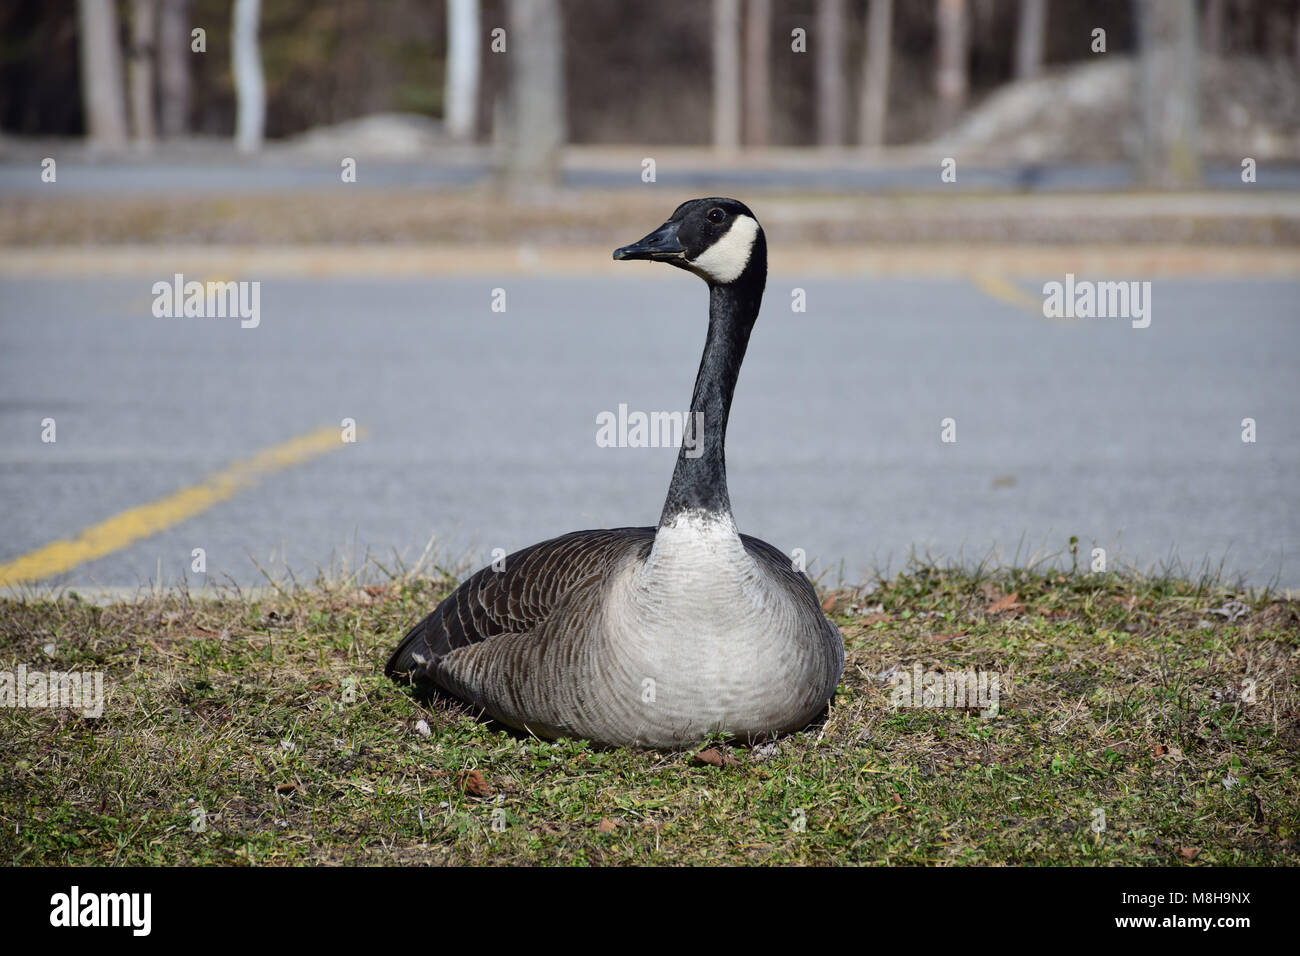 Canadian geese sitting in a parking lot Stock Photo